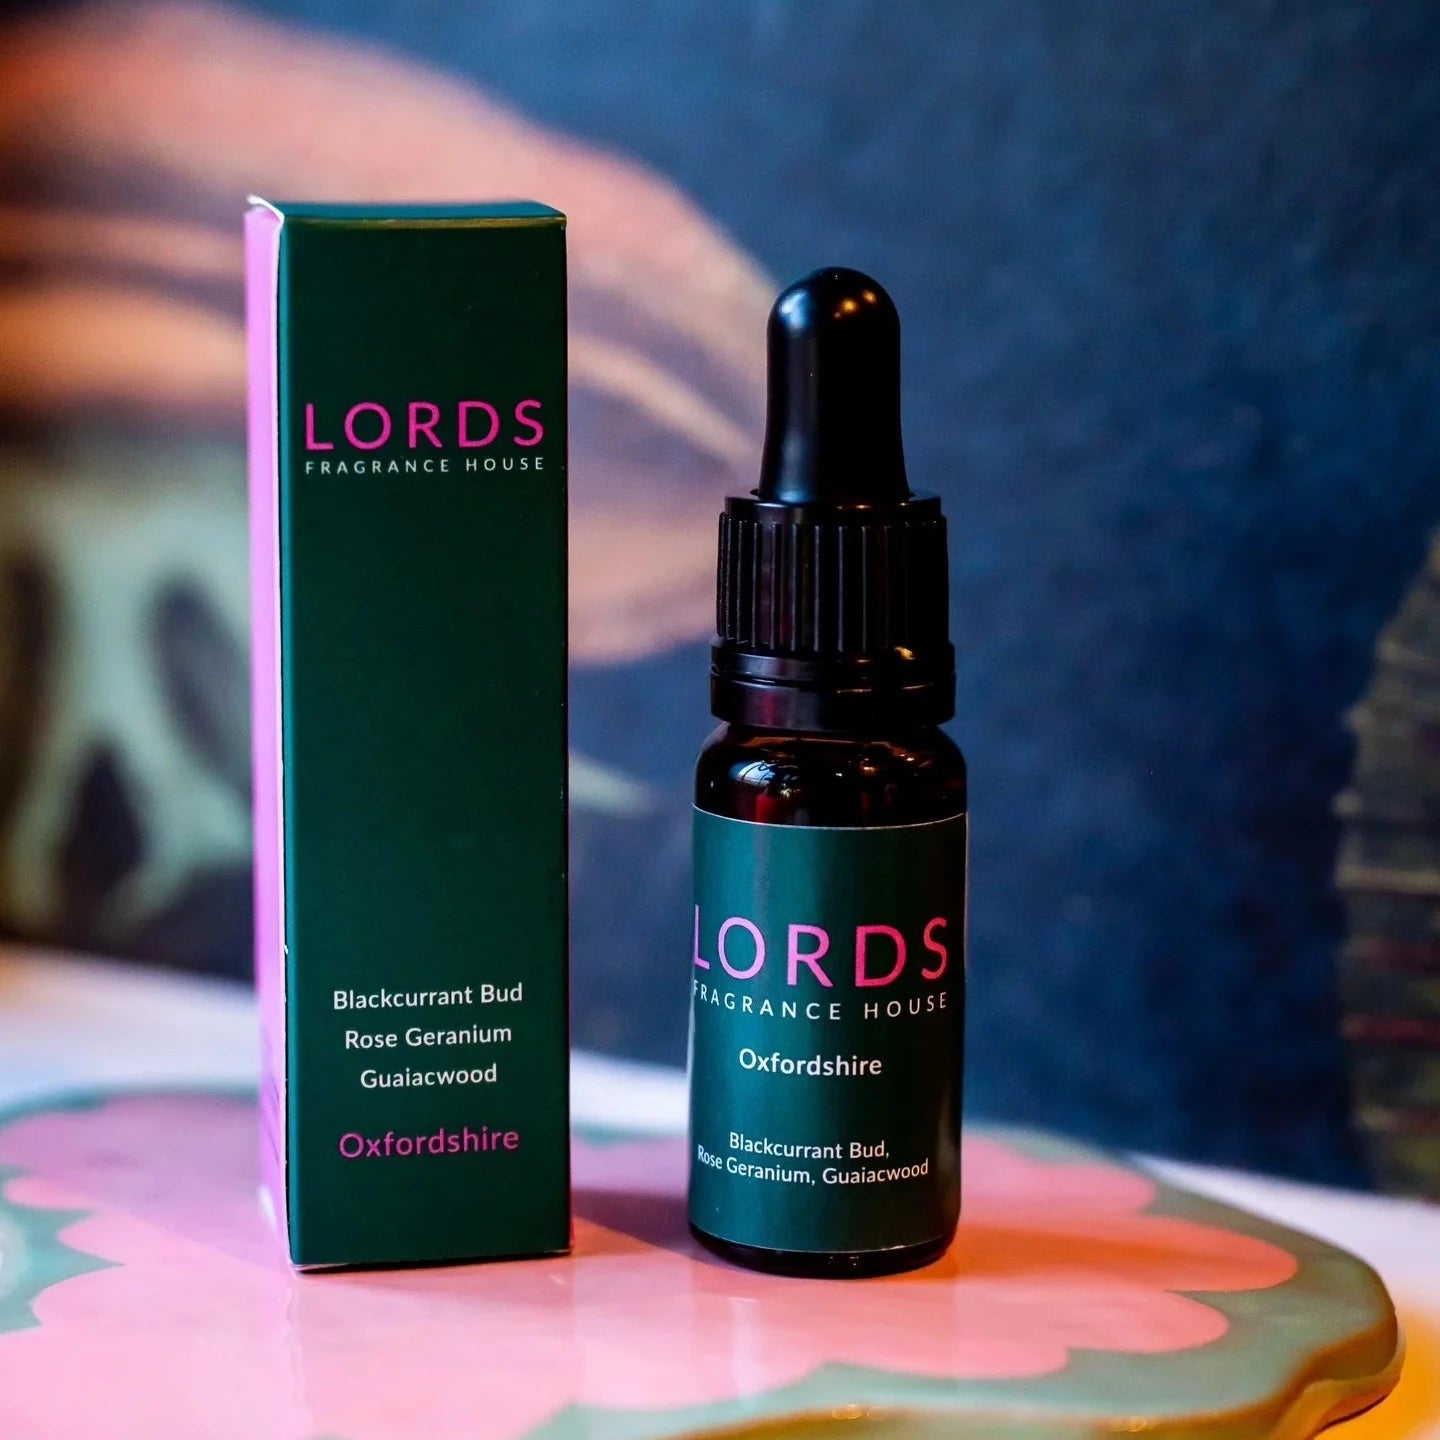 Lords fragrance oils in a choice of 4 scents